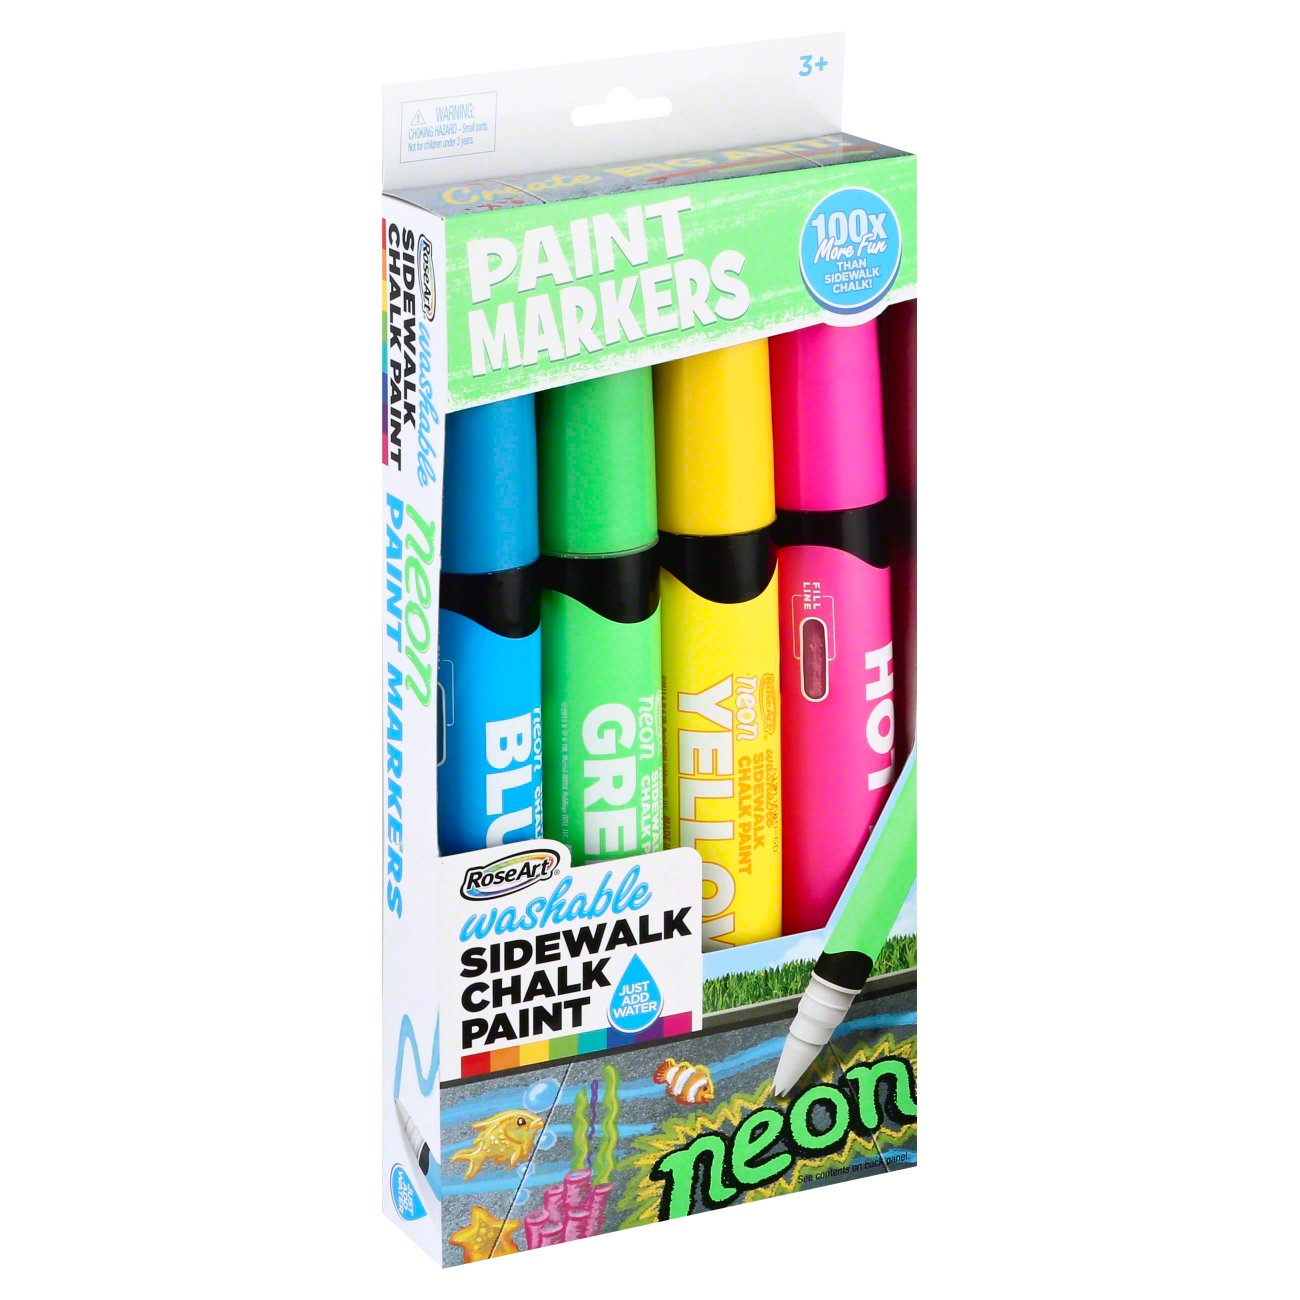 RoseArt Washable Sidewalk Neon Paint Markers, 1 ct - Smith's Food and Drug